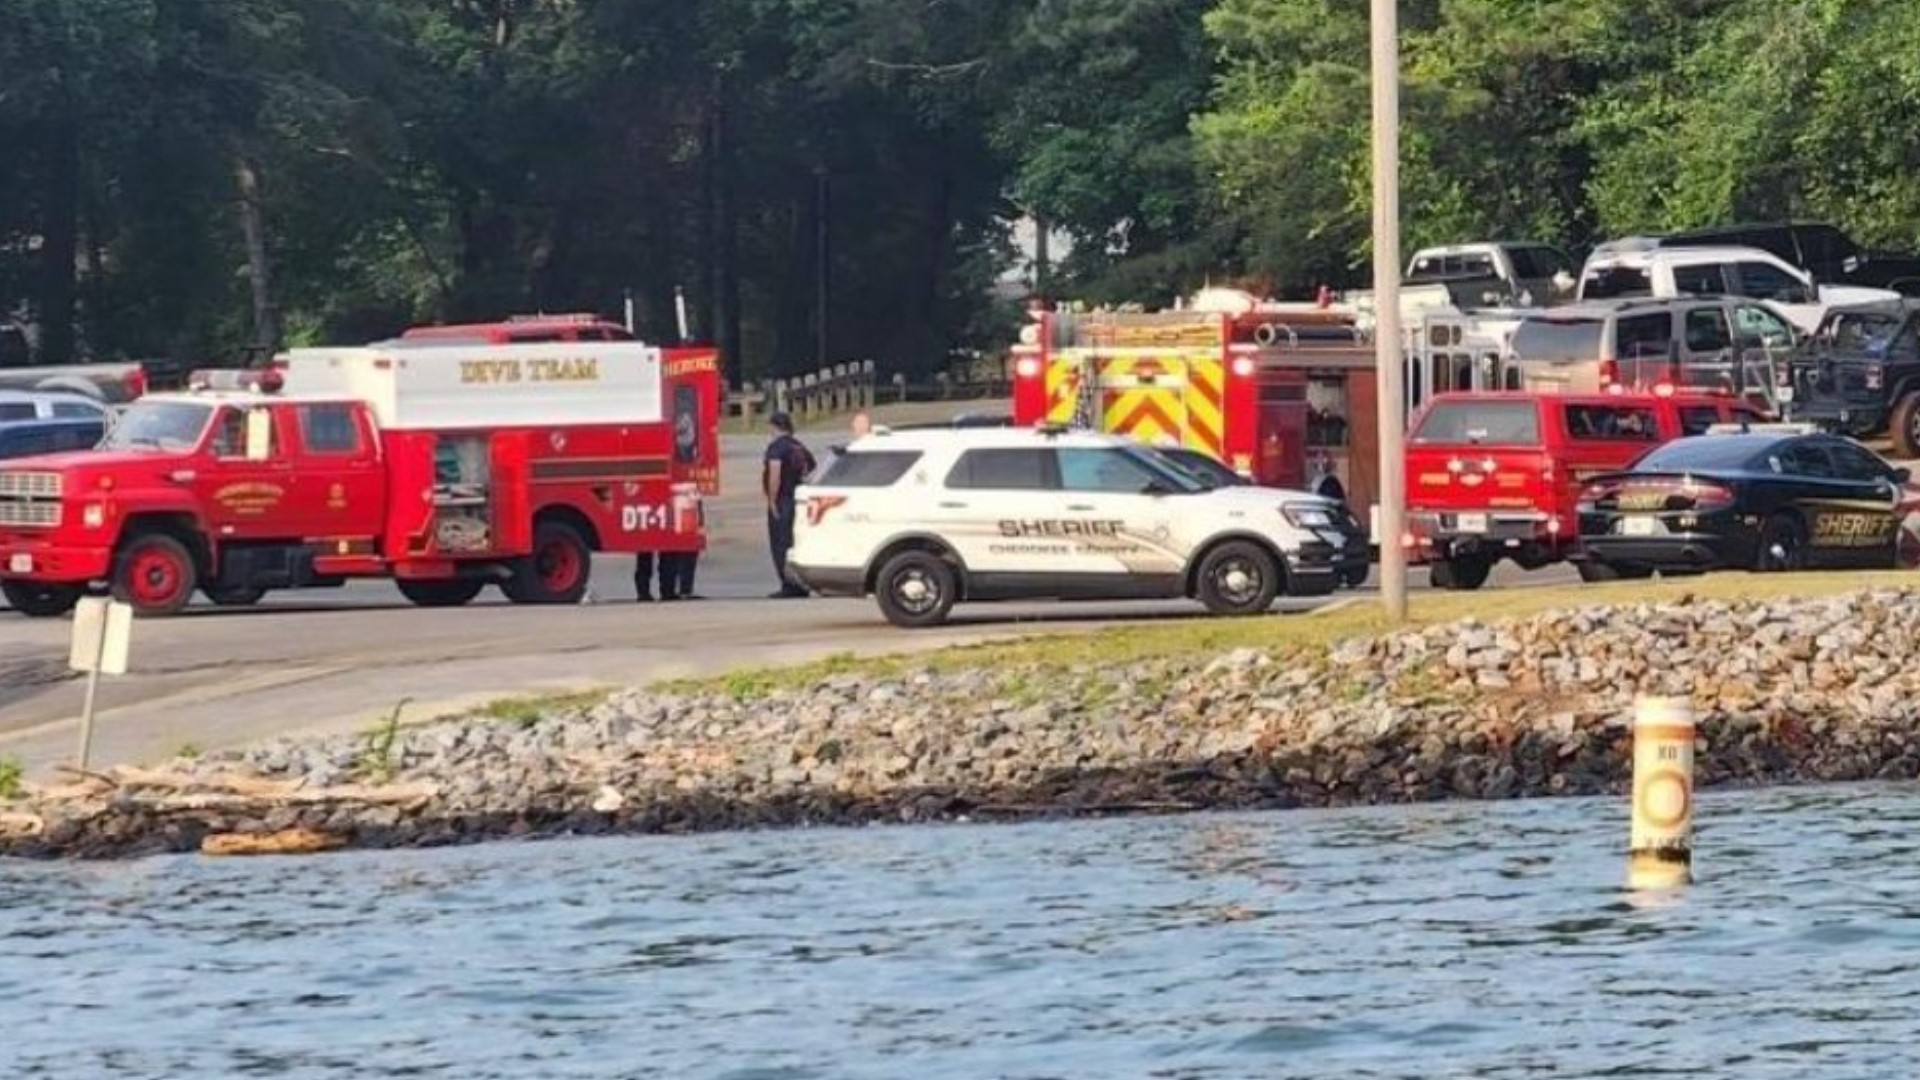 Witnesses later told authorities a man fell off the back of a pontoon boat while parked at the dock.